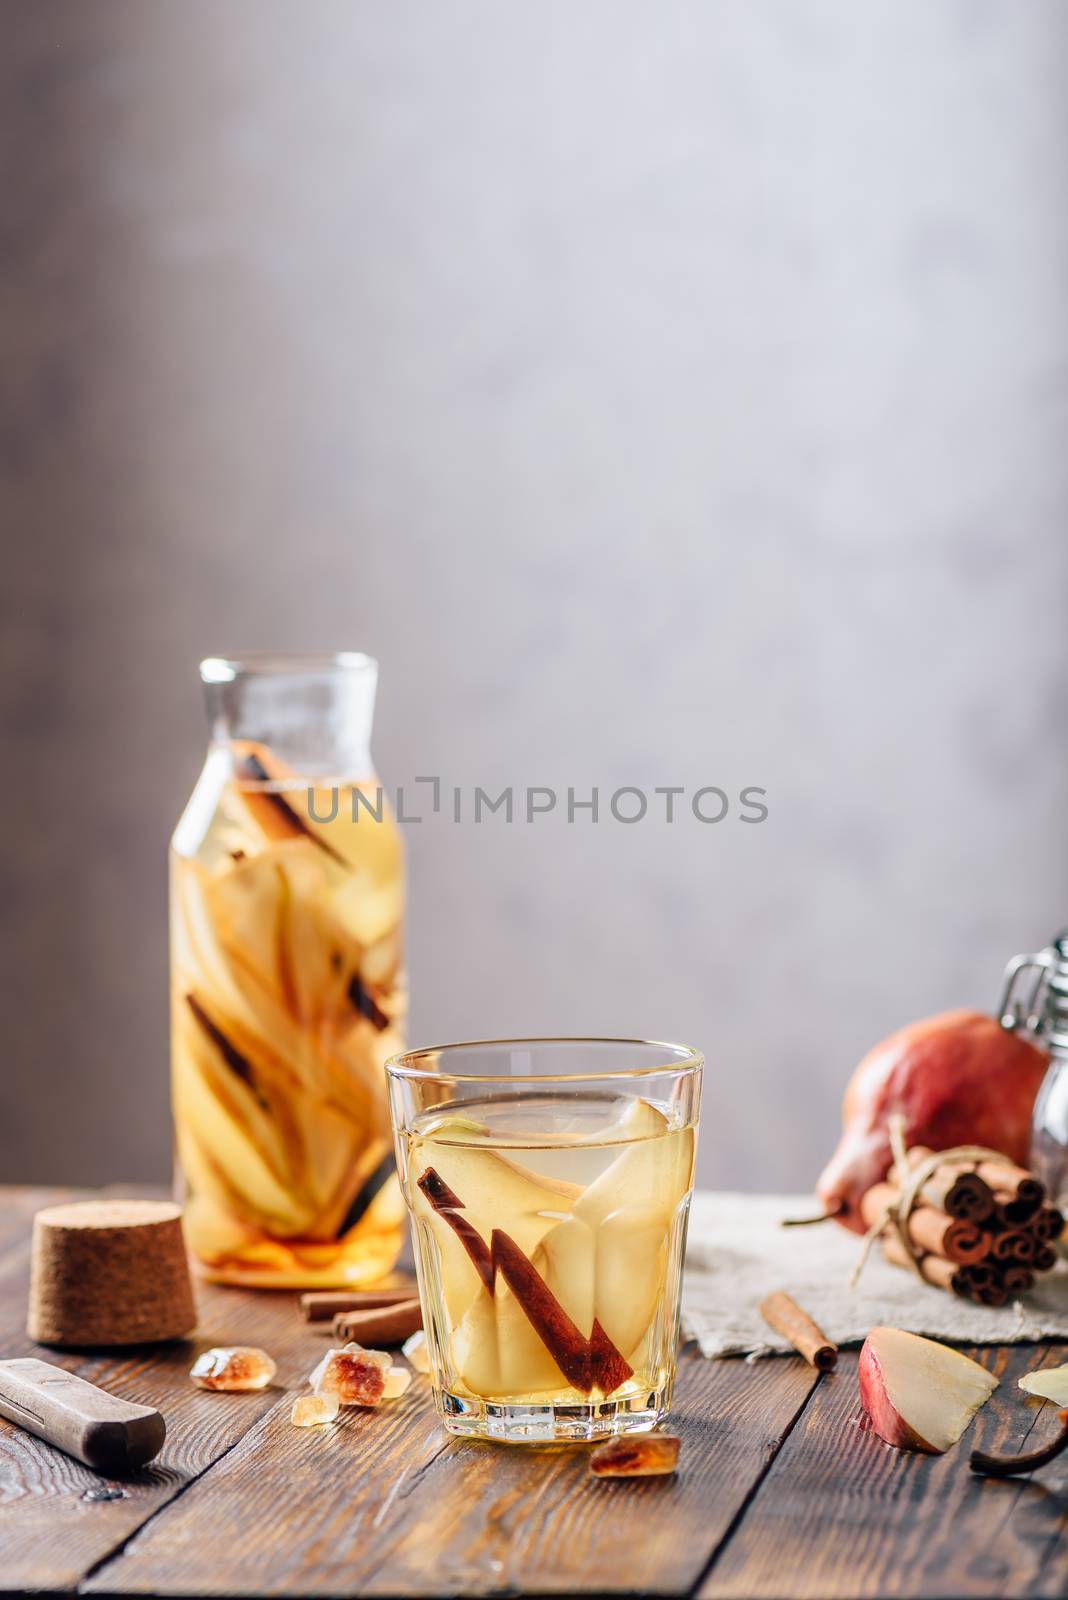 Flavored Water in Glass and Bottle with Sliced Pear, Cinnamon Stick, Ginger Root and Some Sugar. Ingredients on Wooden Table. Vertical Orientation.